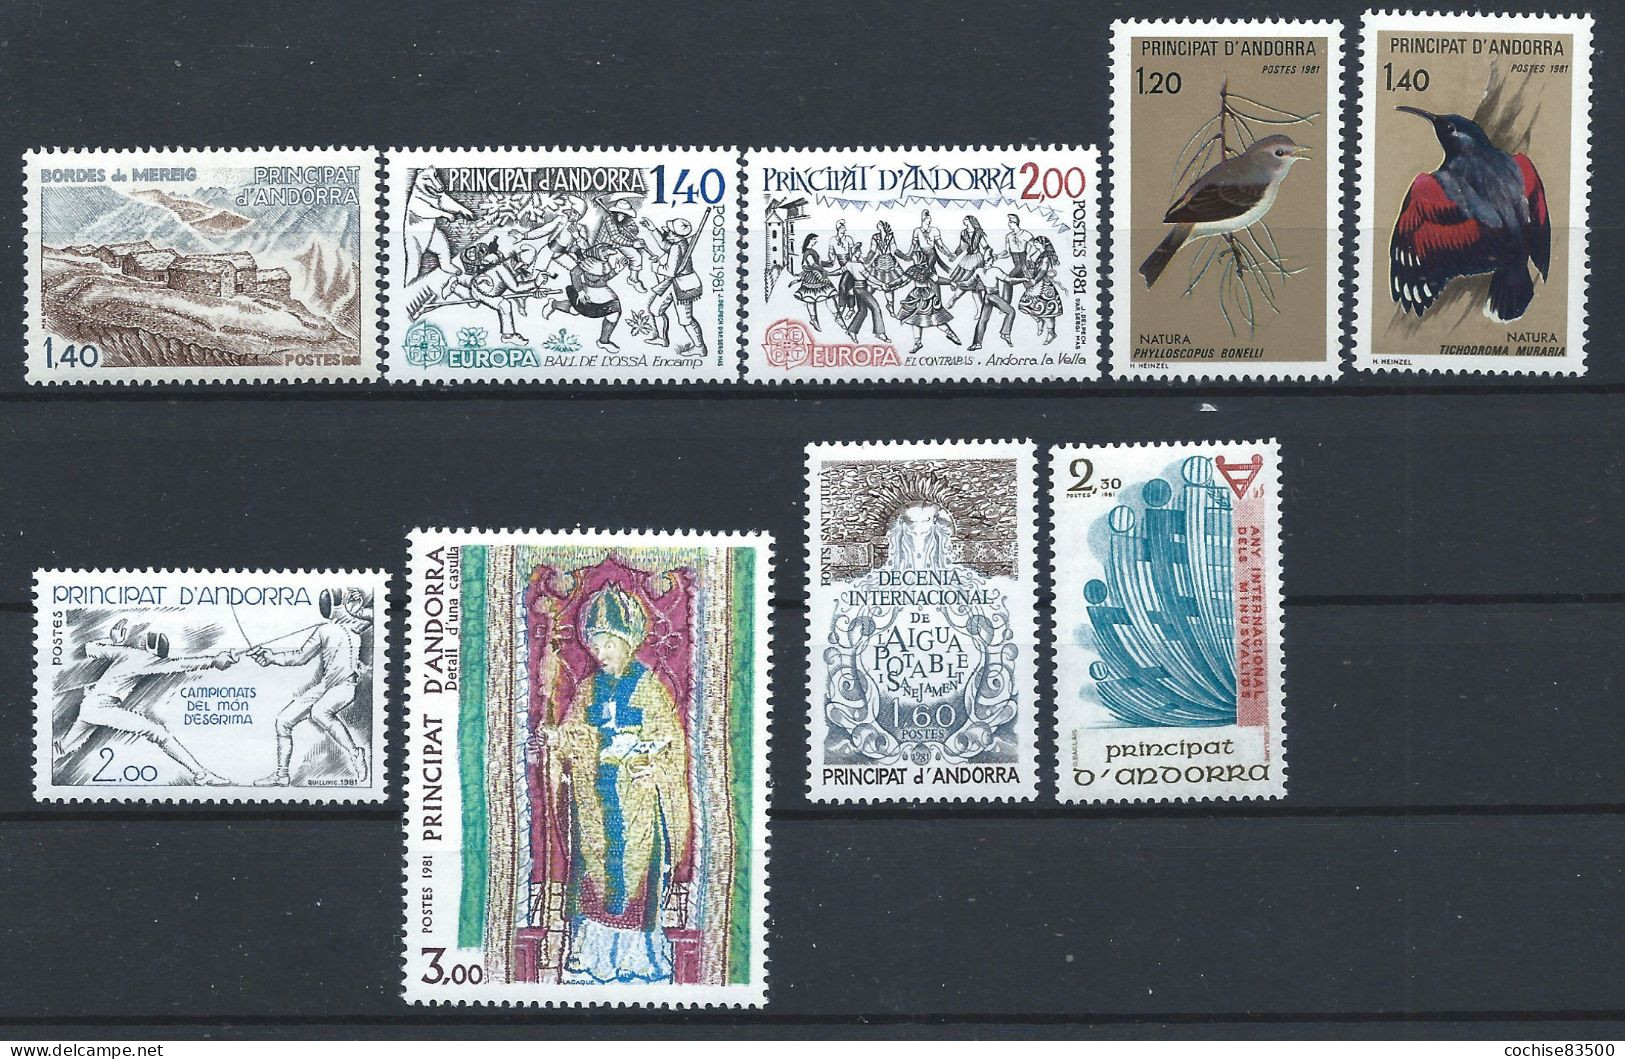 Andorre Lot 9 Tp Neuf** (MNH) Année 1981 - Full Years